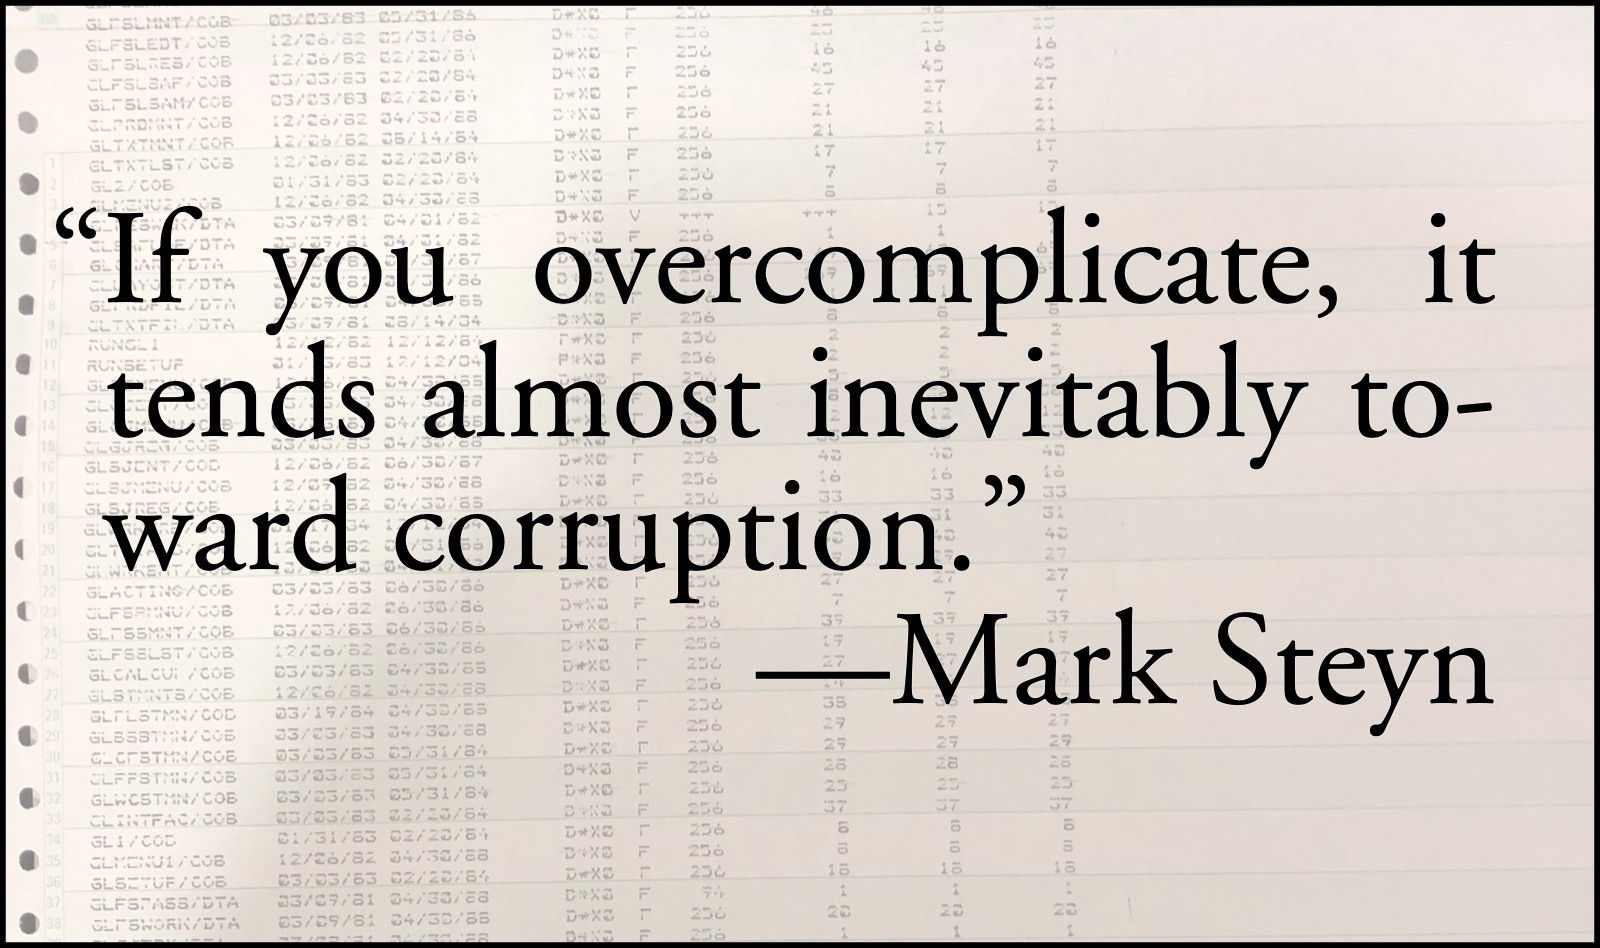 Complicated corruption: Mark Steyn: “If you overcomplicate, it tends almost inevitably toward corruption.”; corruption; complexity